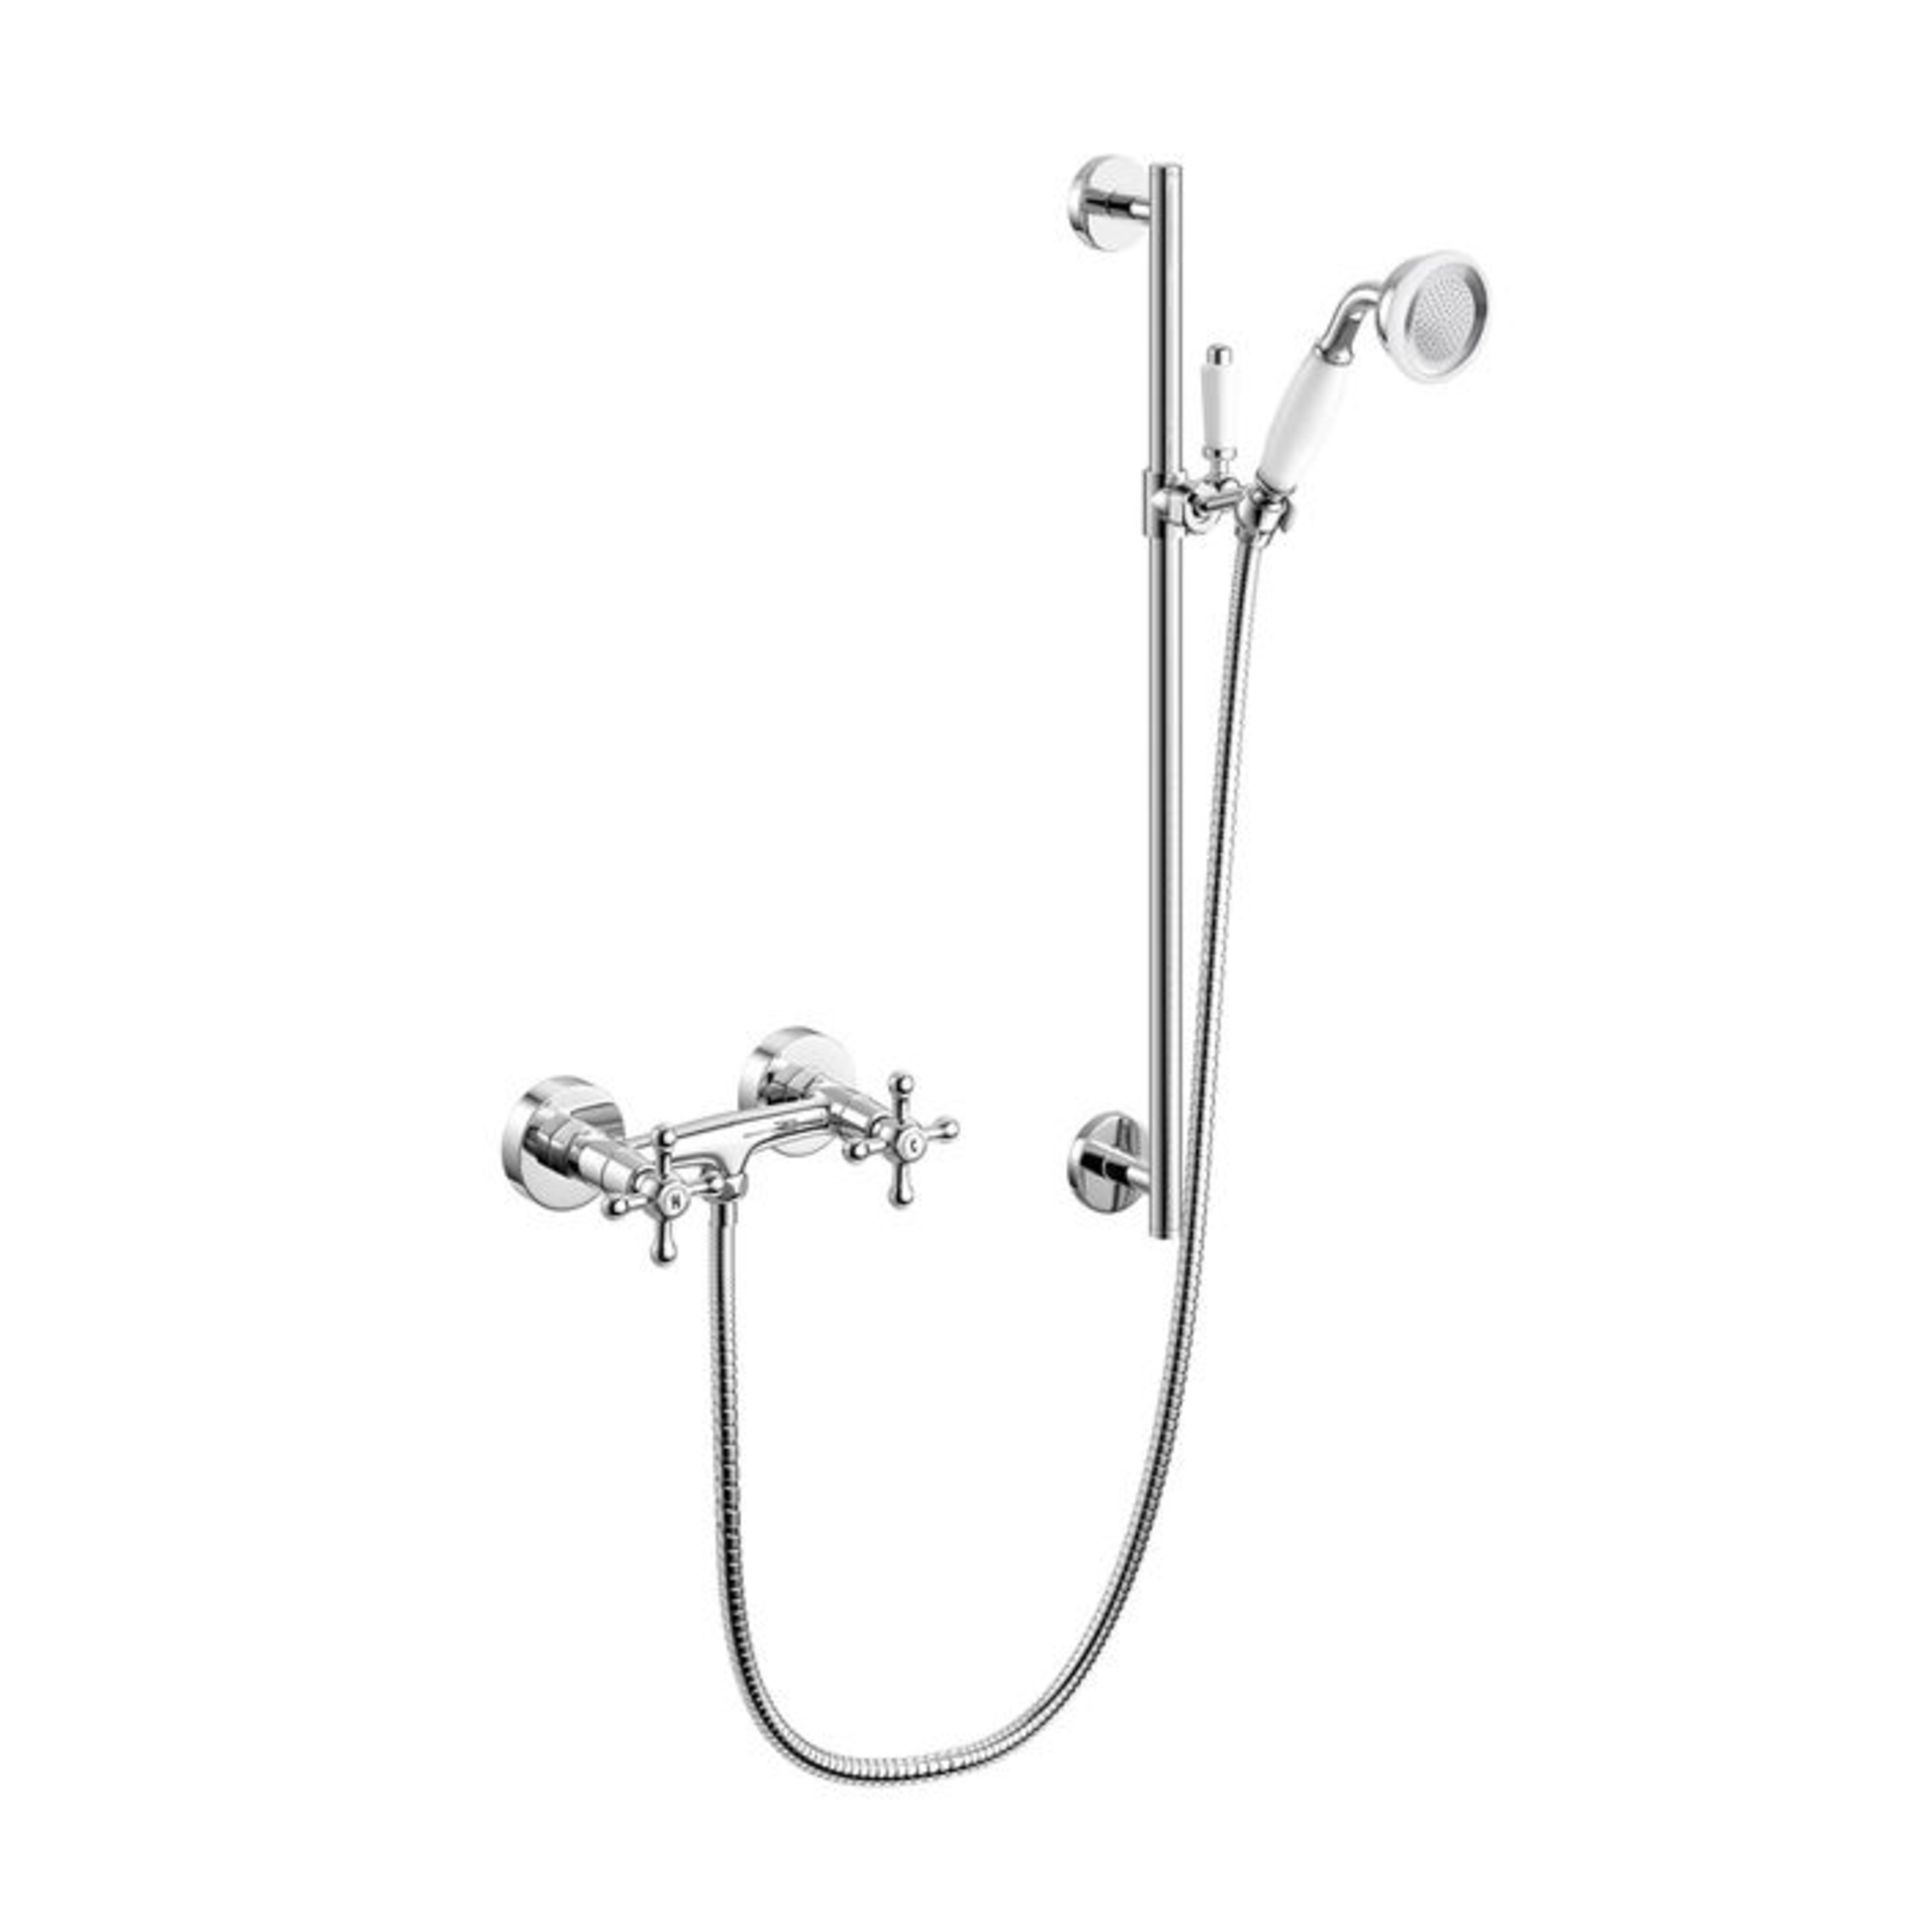 (CT226) Traditional Exposed Bar Mixer Kit Exposed design makes for a statement piece Traditional - Image 2 of 3